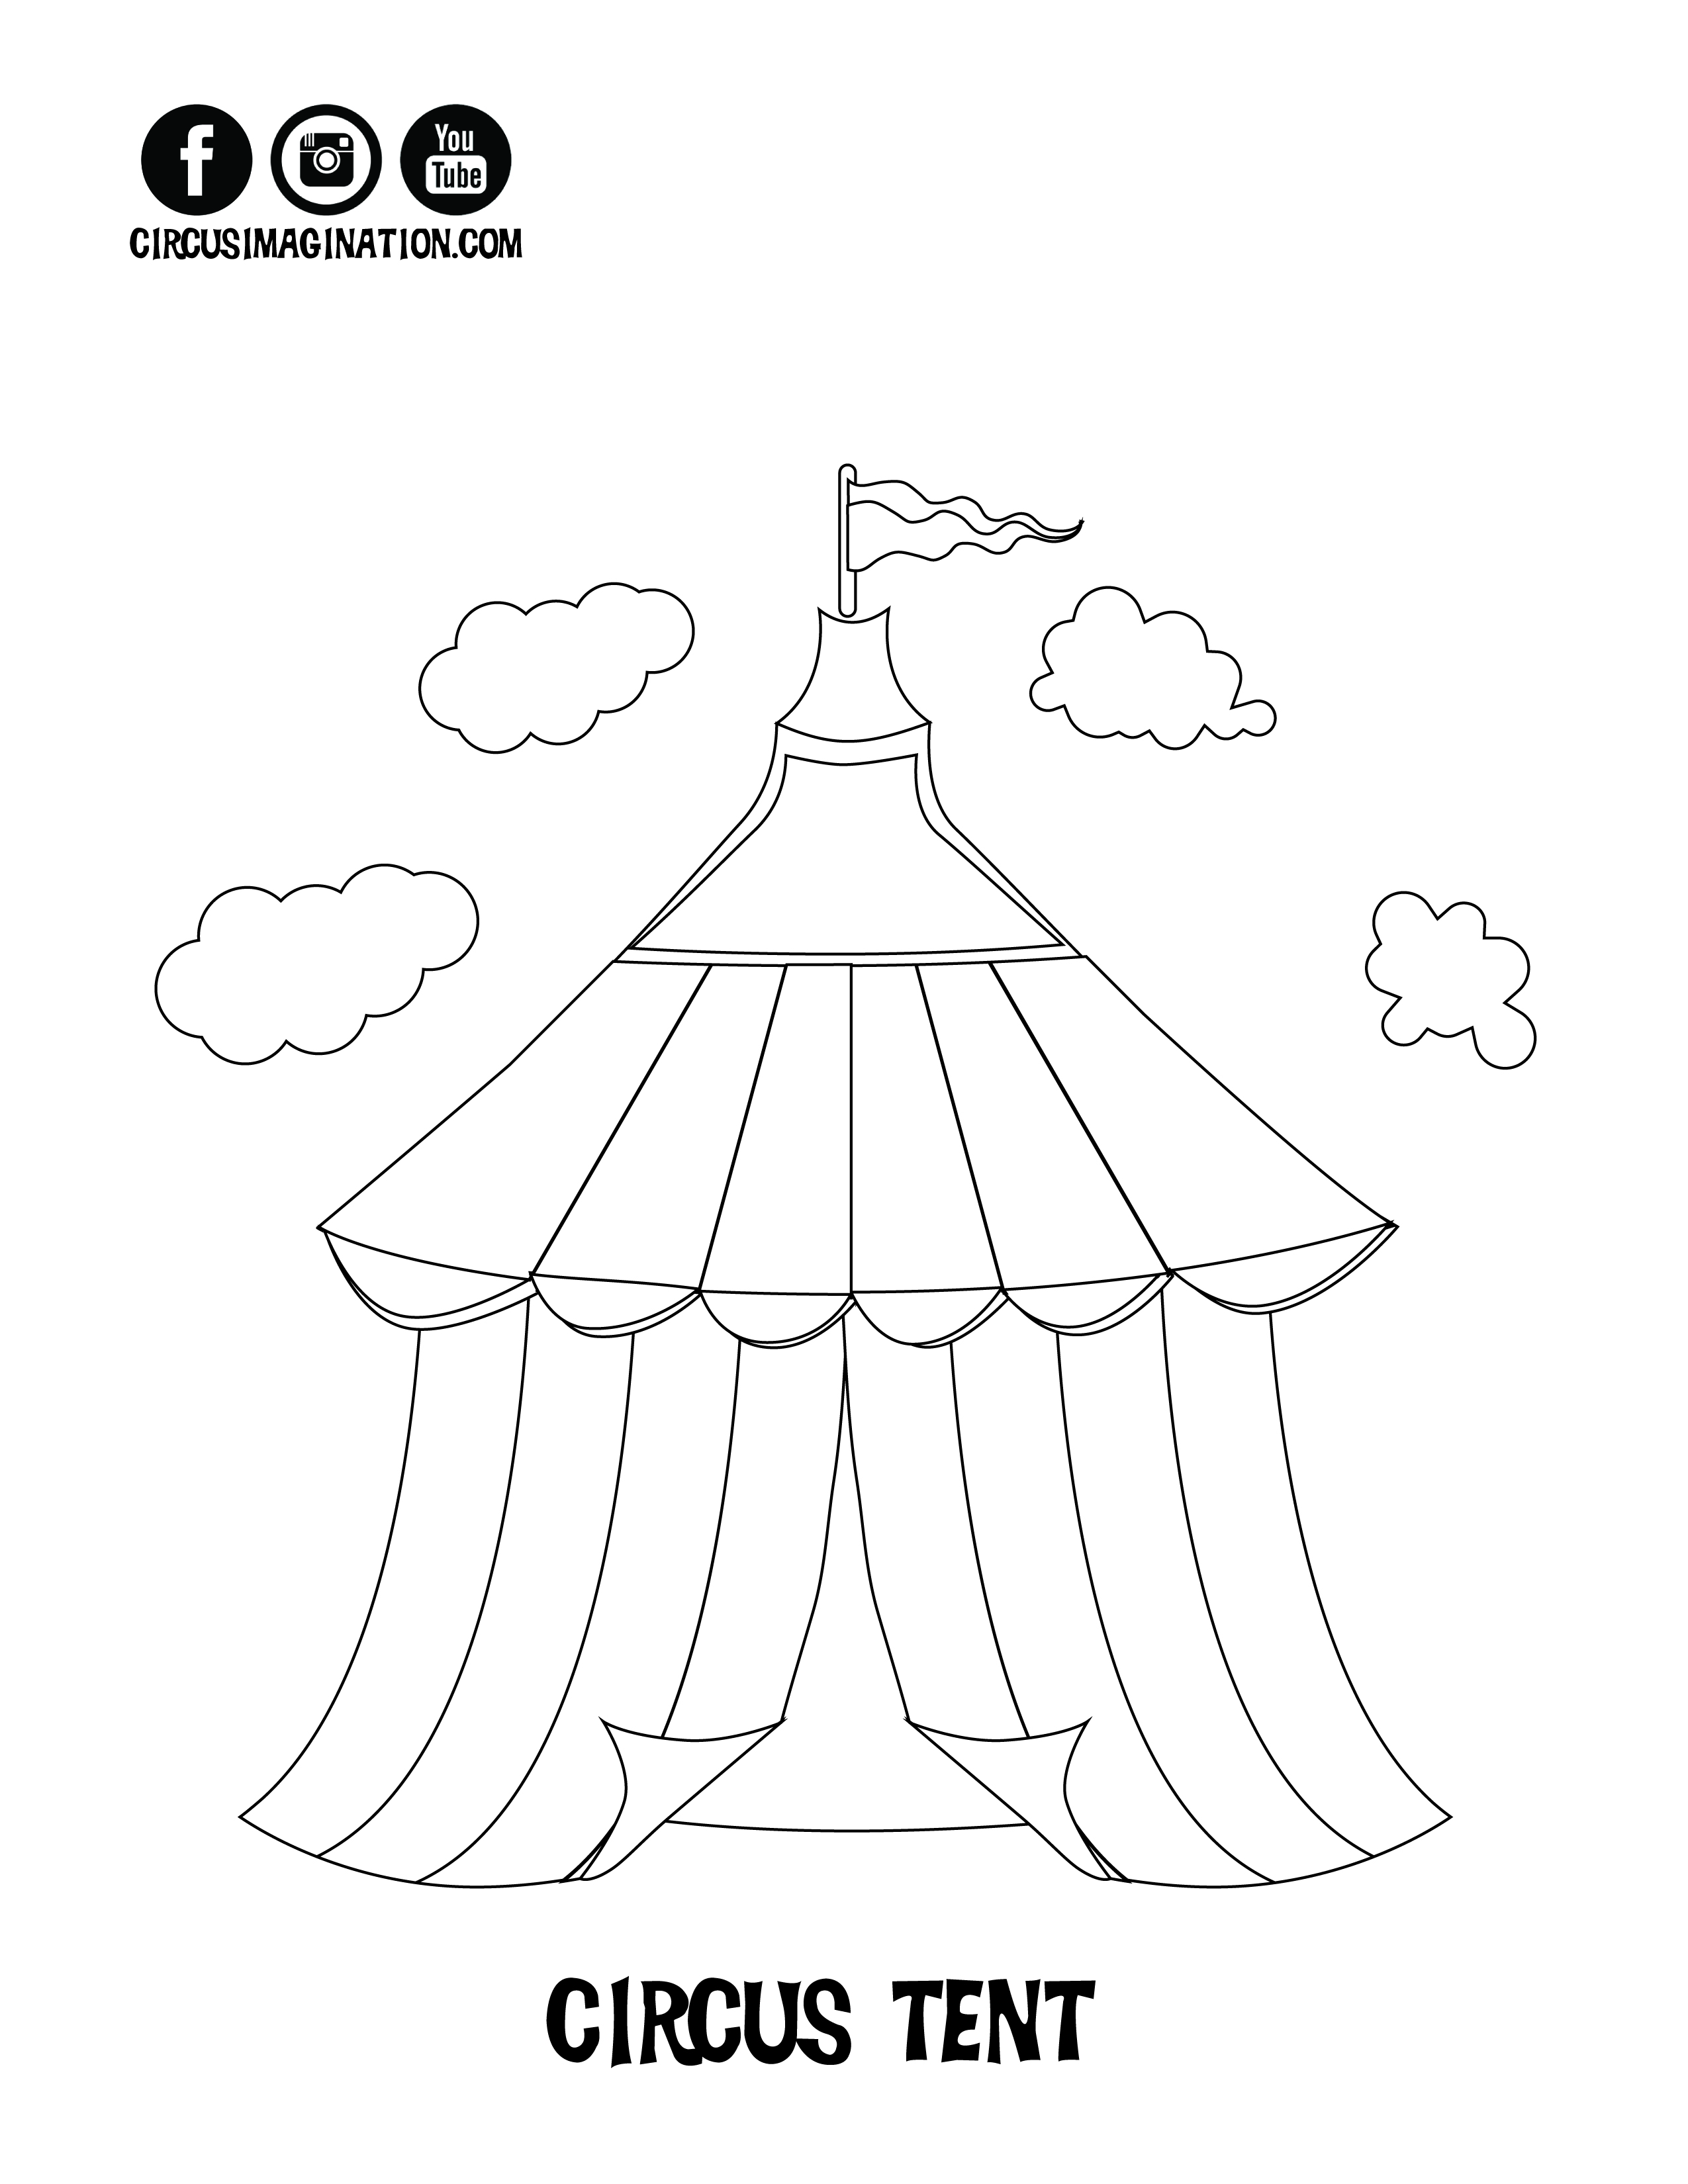 http://www.circusimagination.com/images/PLAY/coloring%20page%20CIRCUS%20TENT%20jpeg.jpg